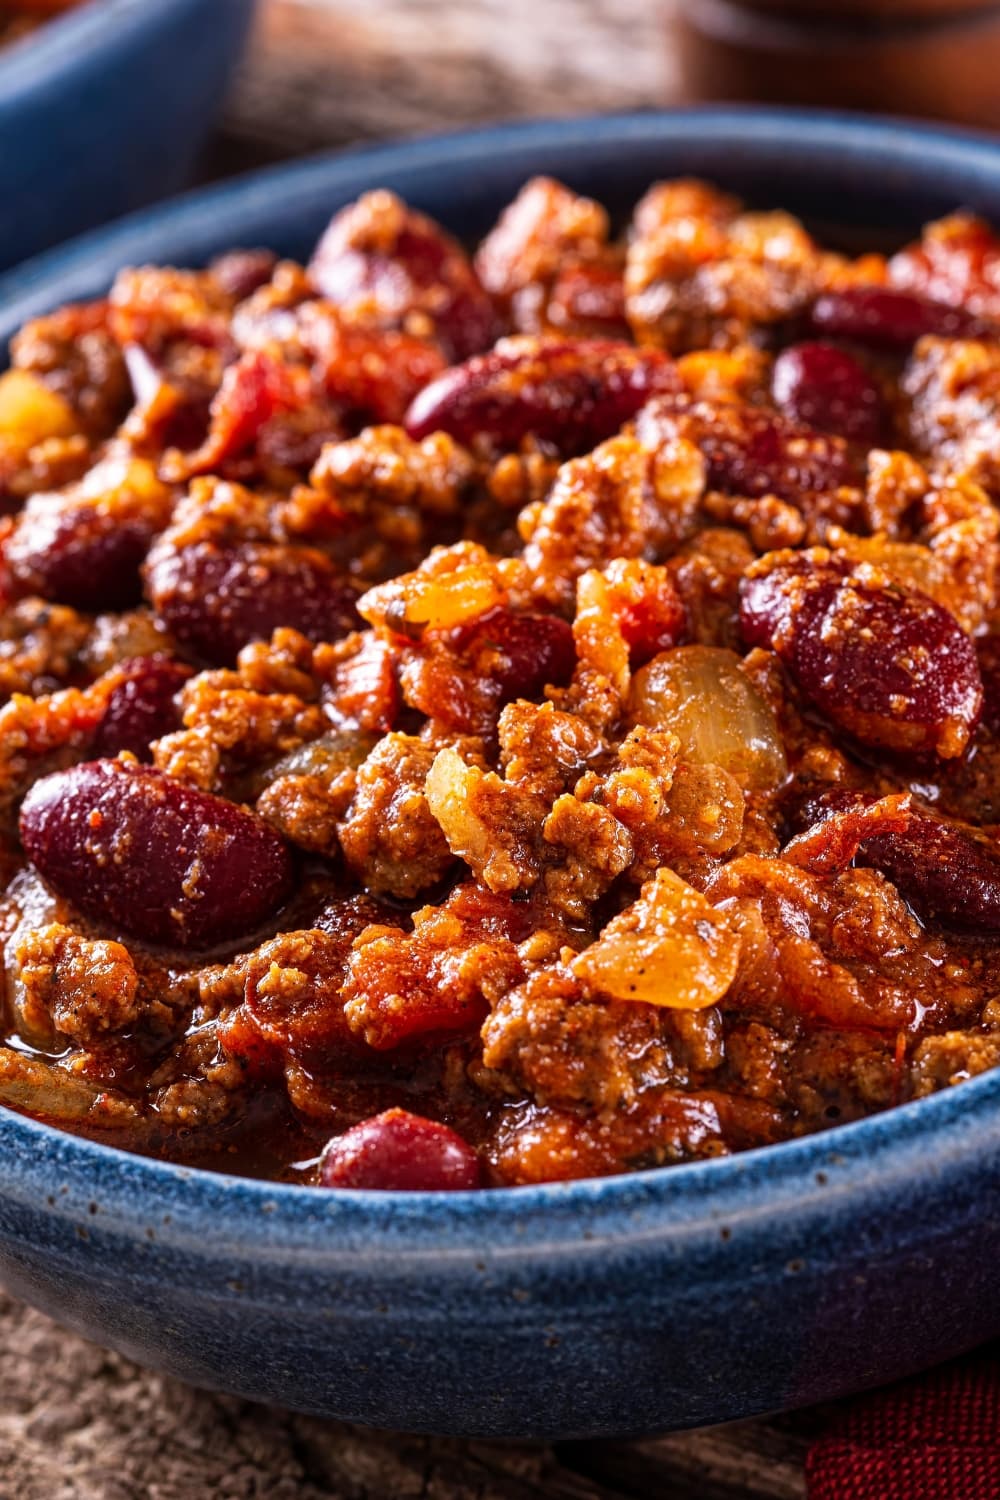 Homemade Chili with Beans and Ground Beef